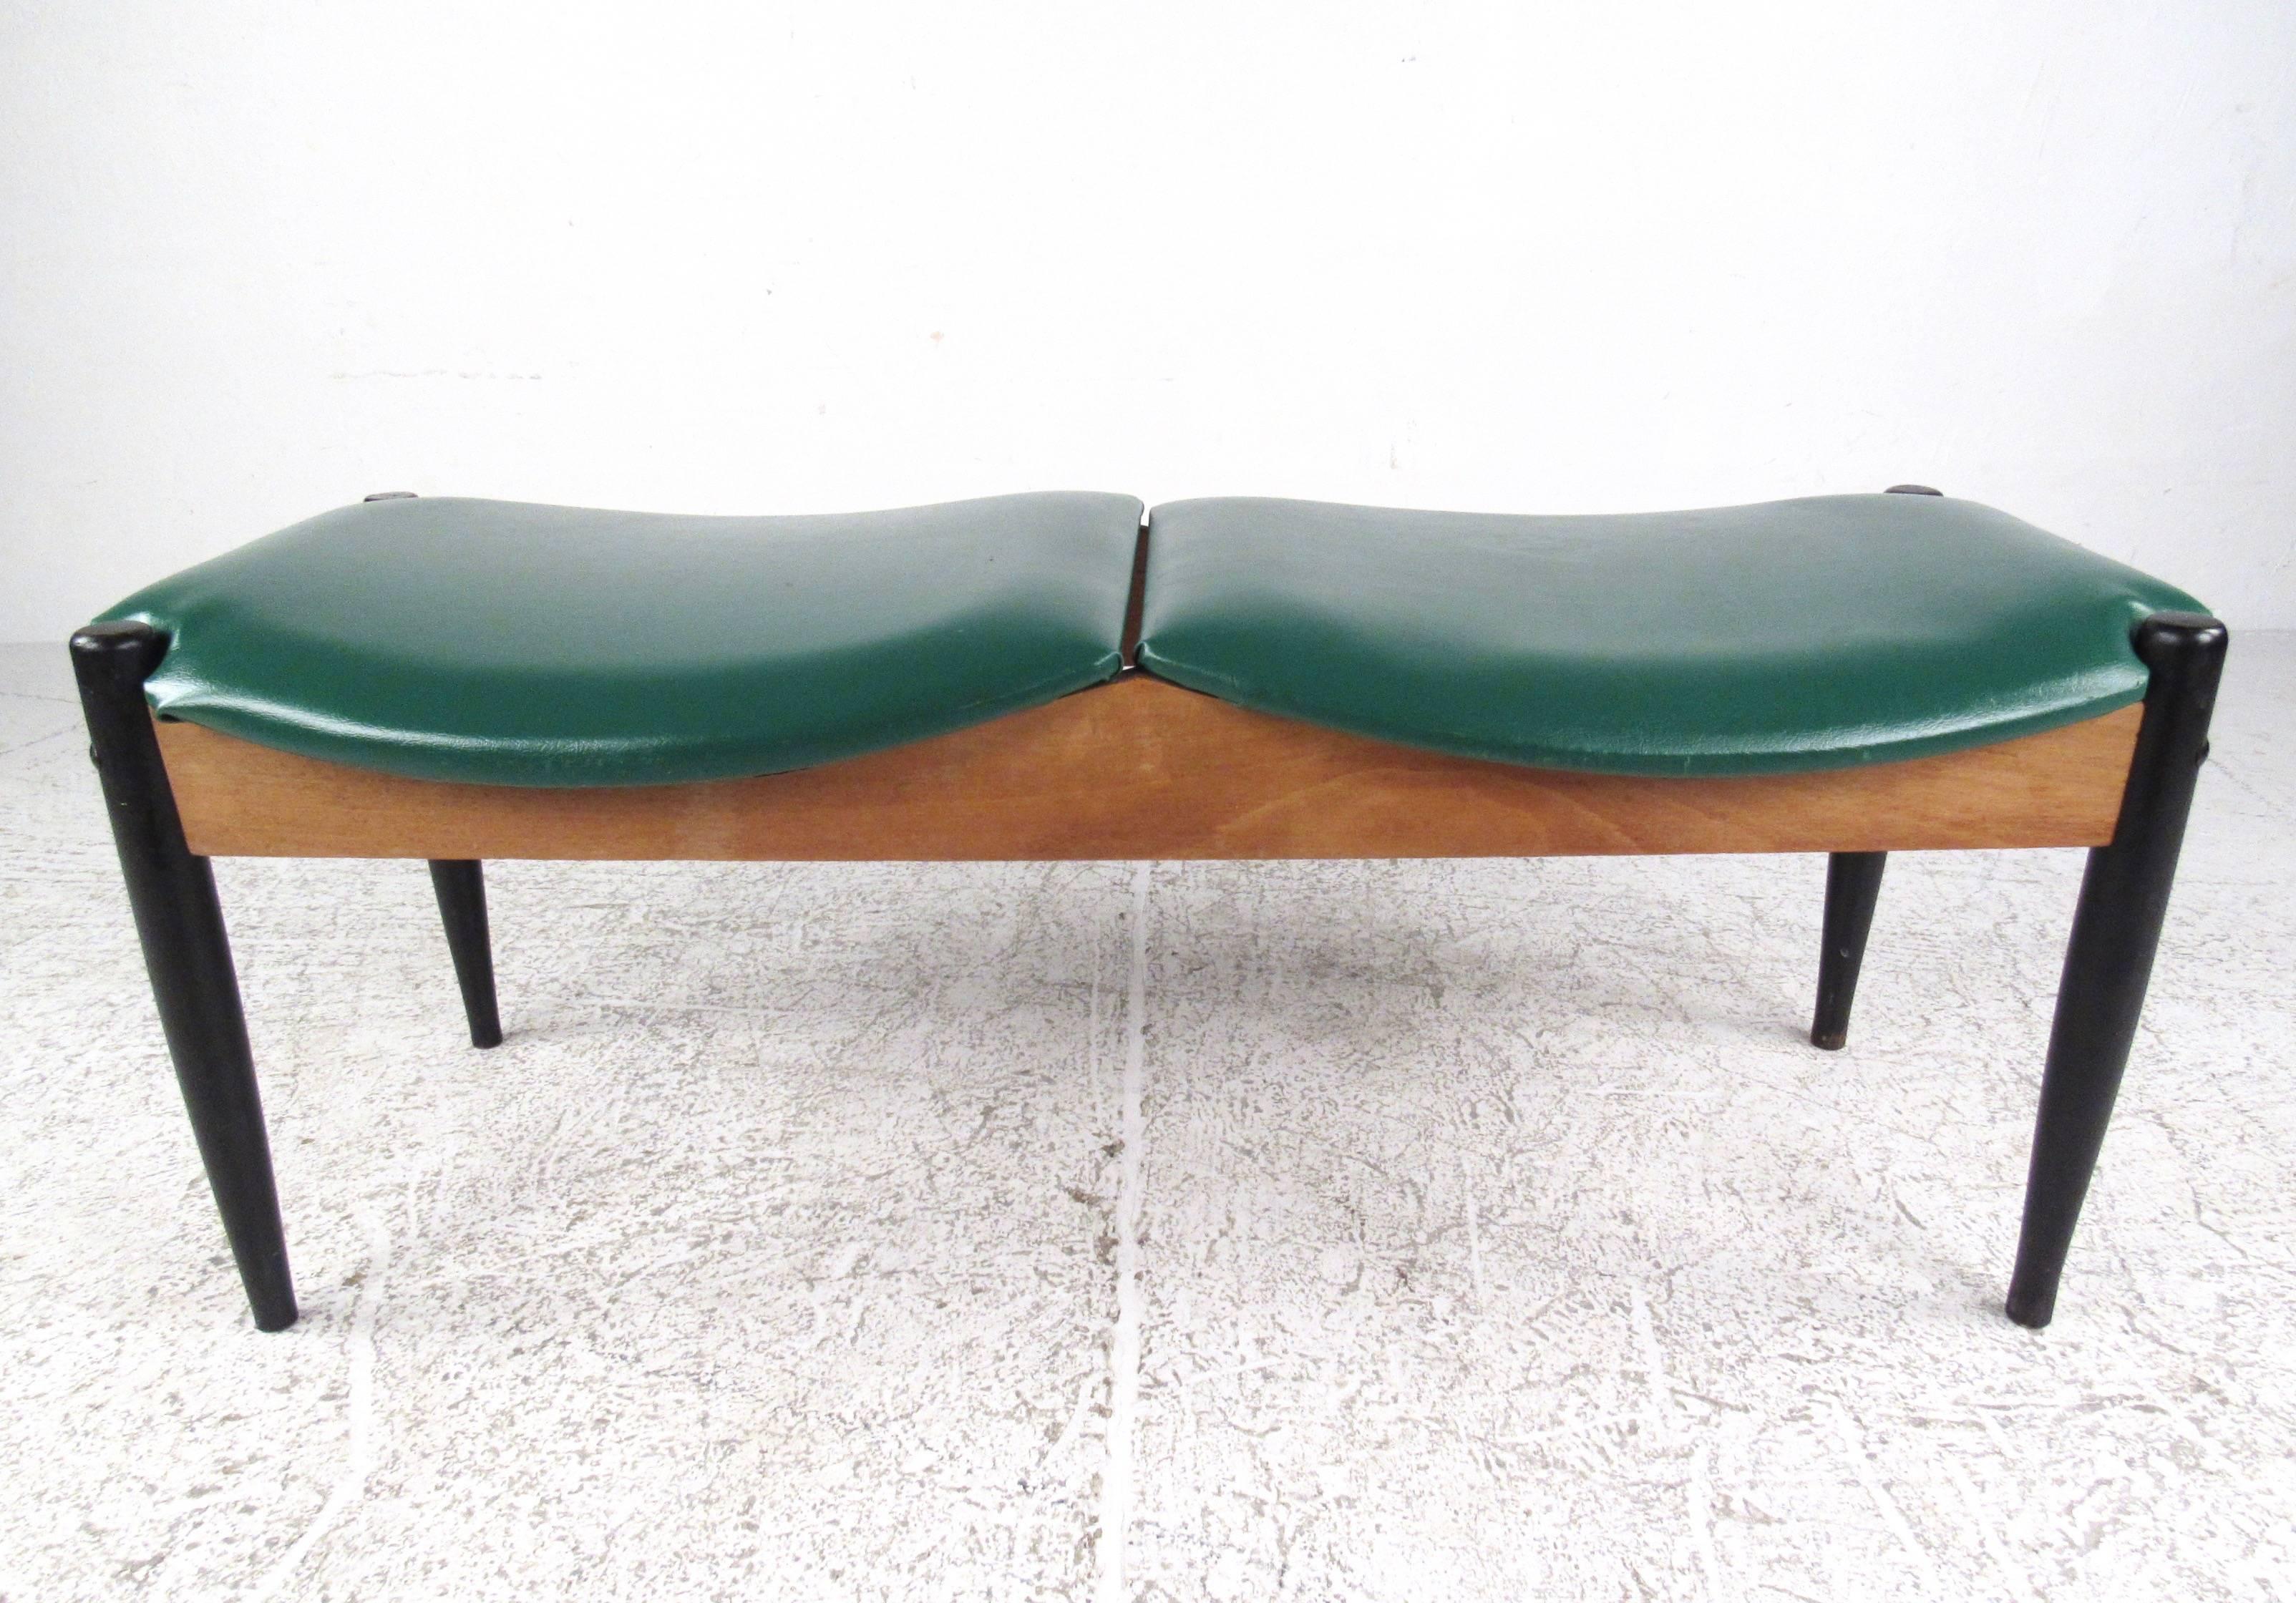 This Mid-Century two-seat window bench by John Stuart features sturdy vintage construction, comfortable padded vinyl seats, and tapered black lacquer legs. This stylish John Stuart design makes a beautiful addition to any home or office. Please